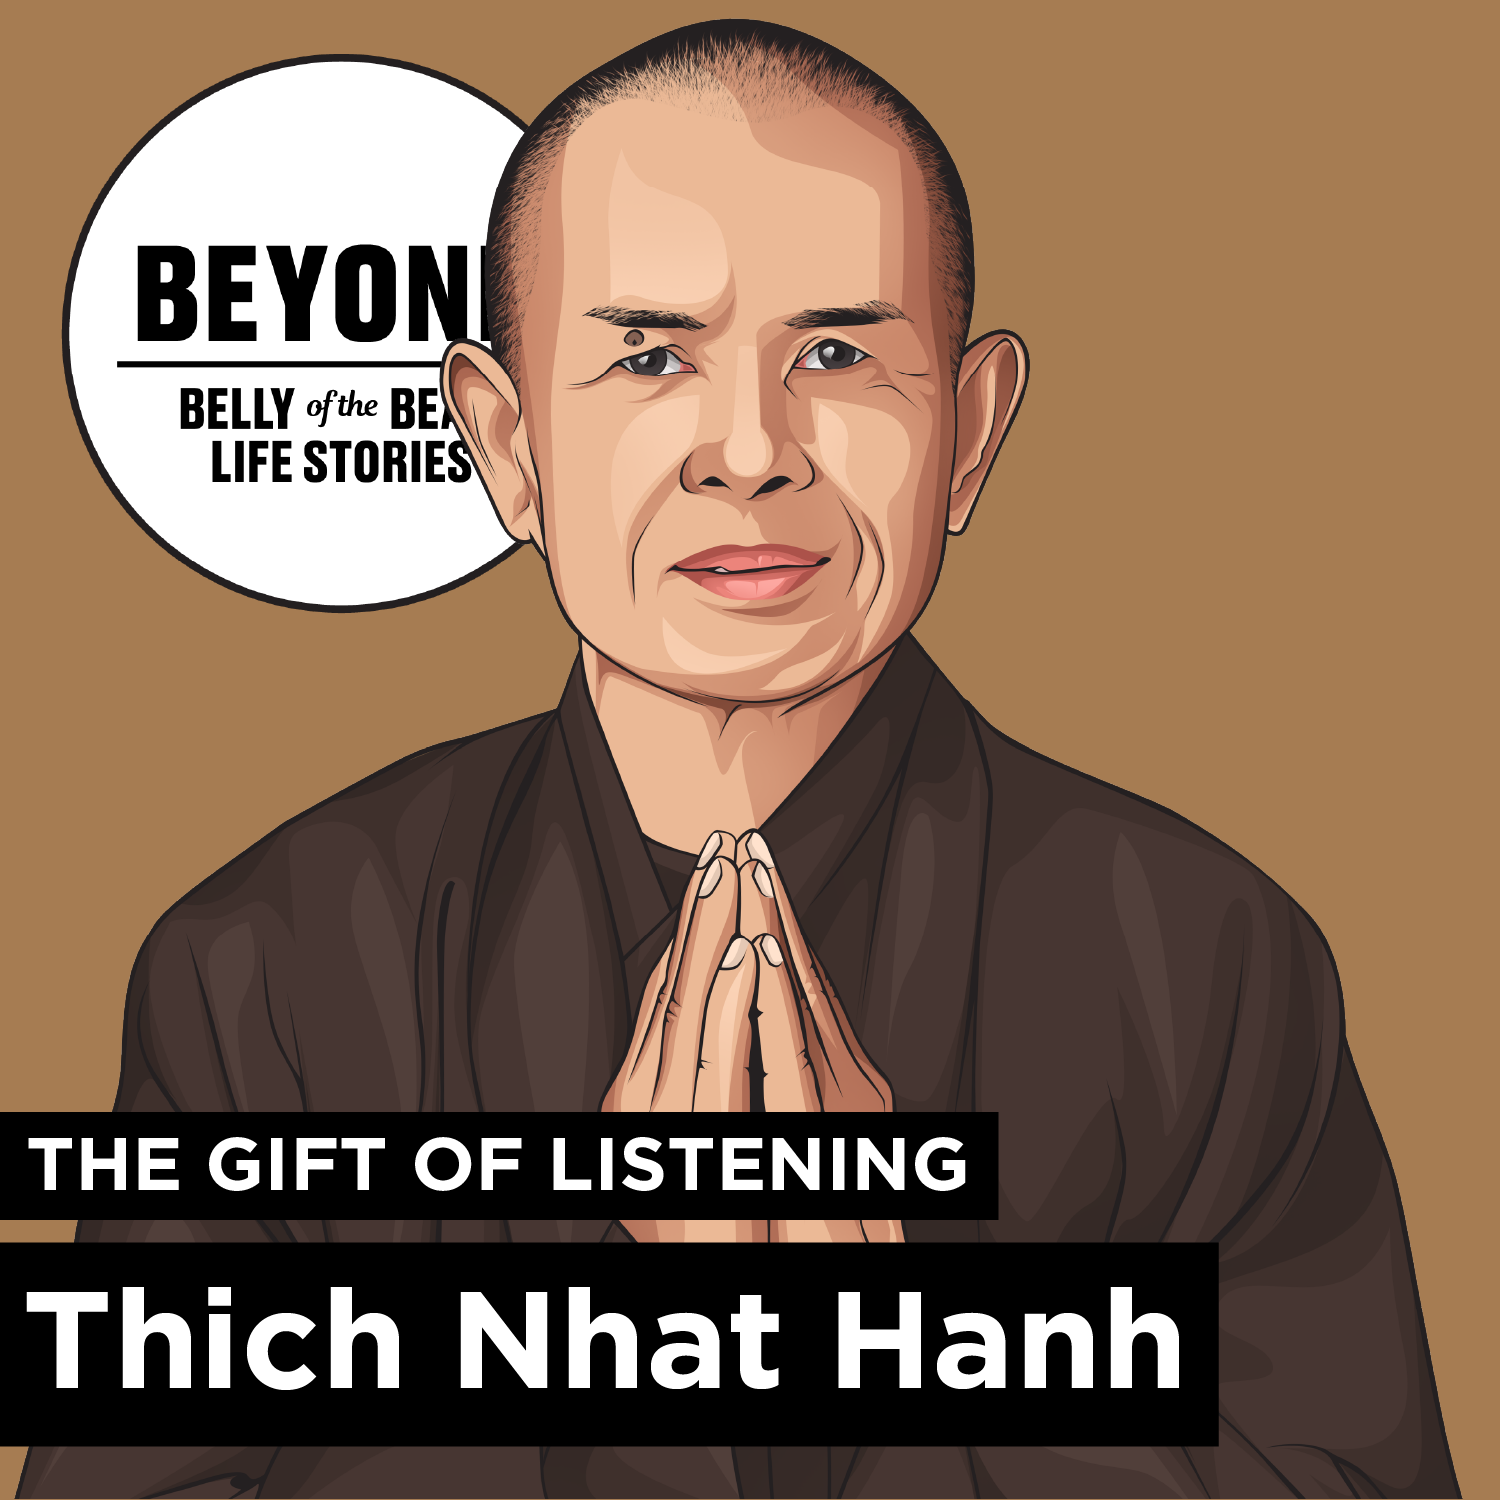 Beyond: The Gift of Listening and Thich Nhat Hanh Image